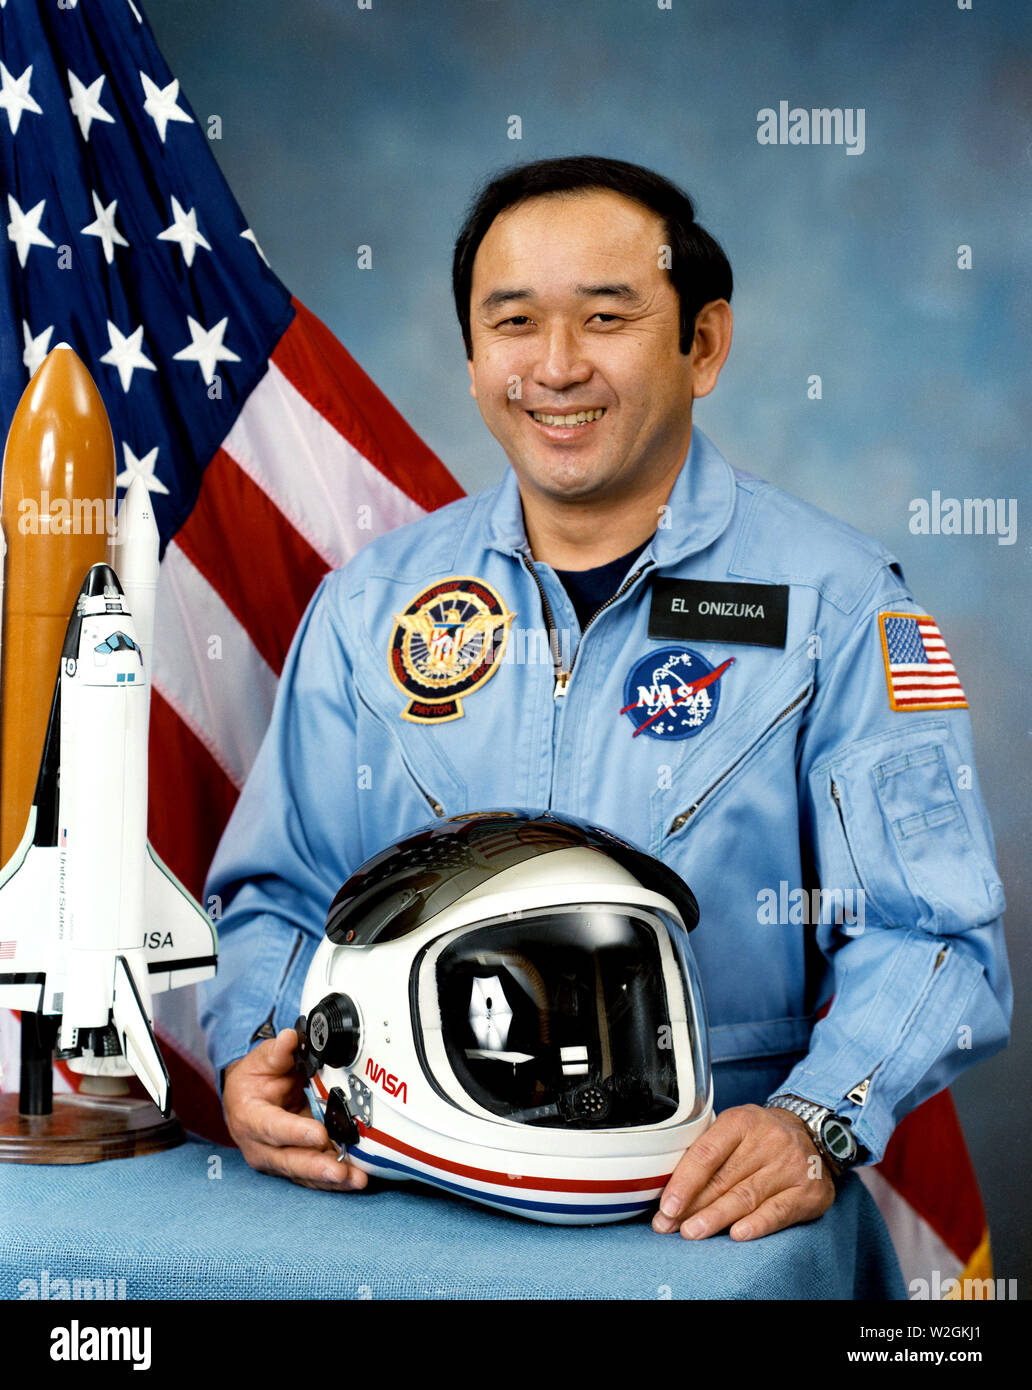 (31 Jan. 1978) --- Astronaut Ellison S. Onizuka. (NOTE: Astronaut Onizuka lost his life in the Jan. 28, 1986, STS-51L space shuttle Challenger accident, along with six other crew members.) Stock Photo